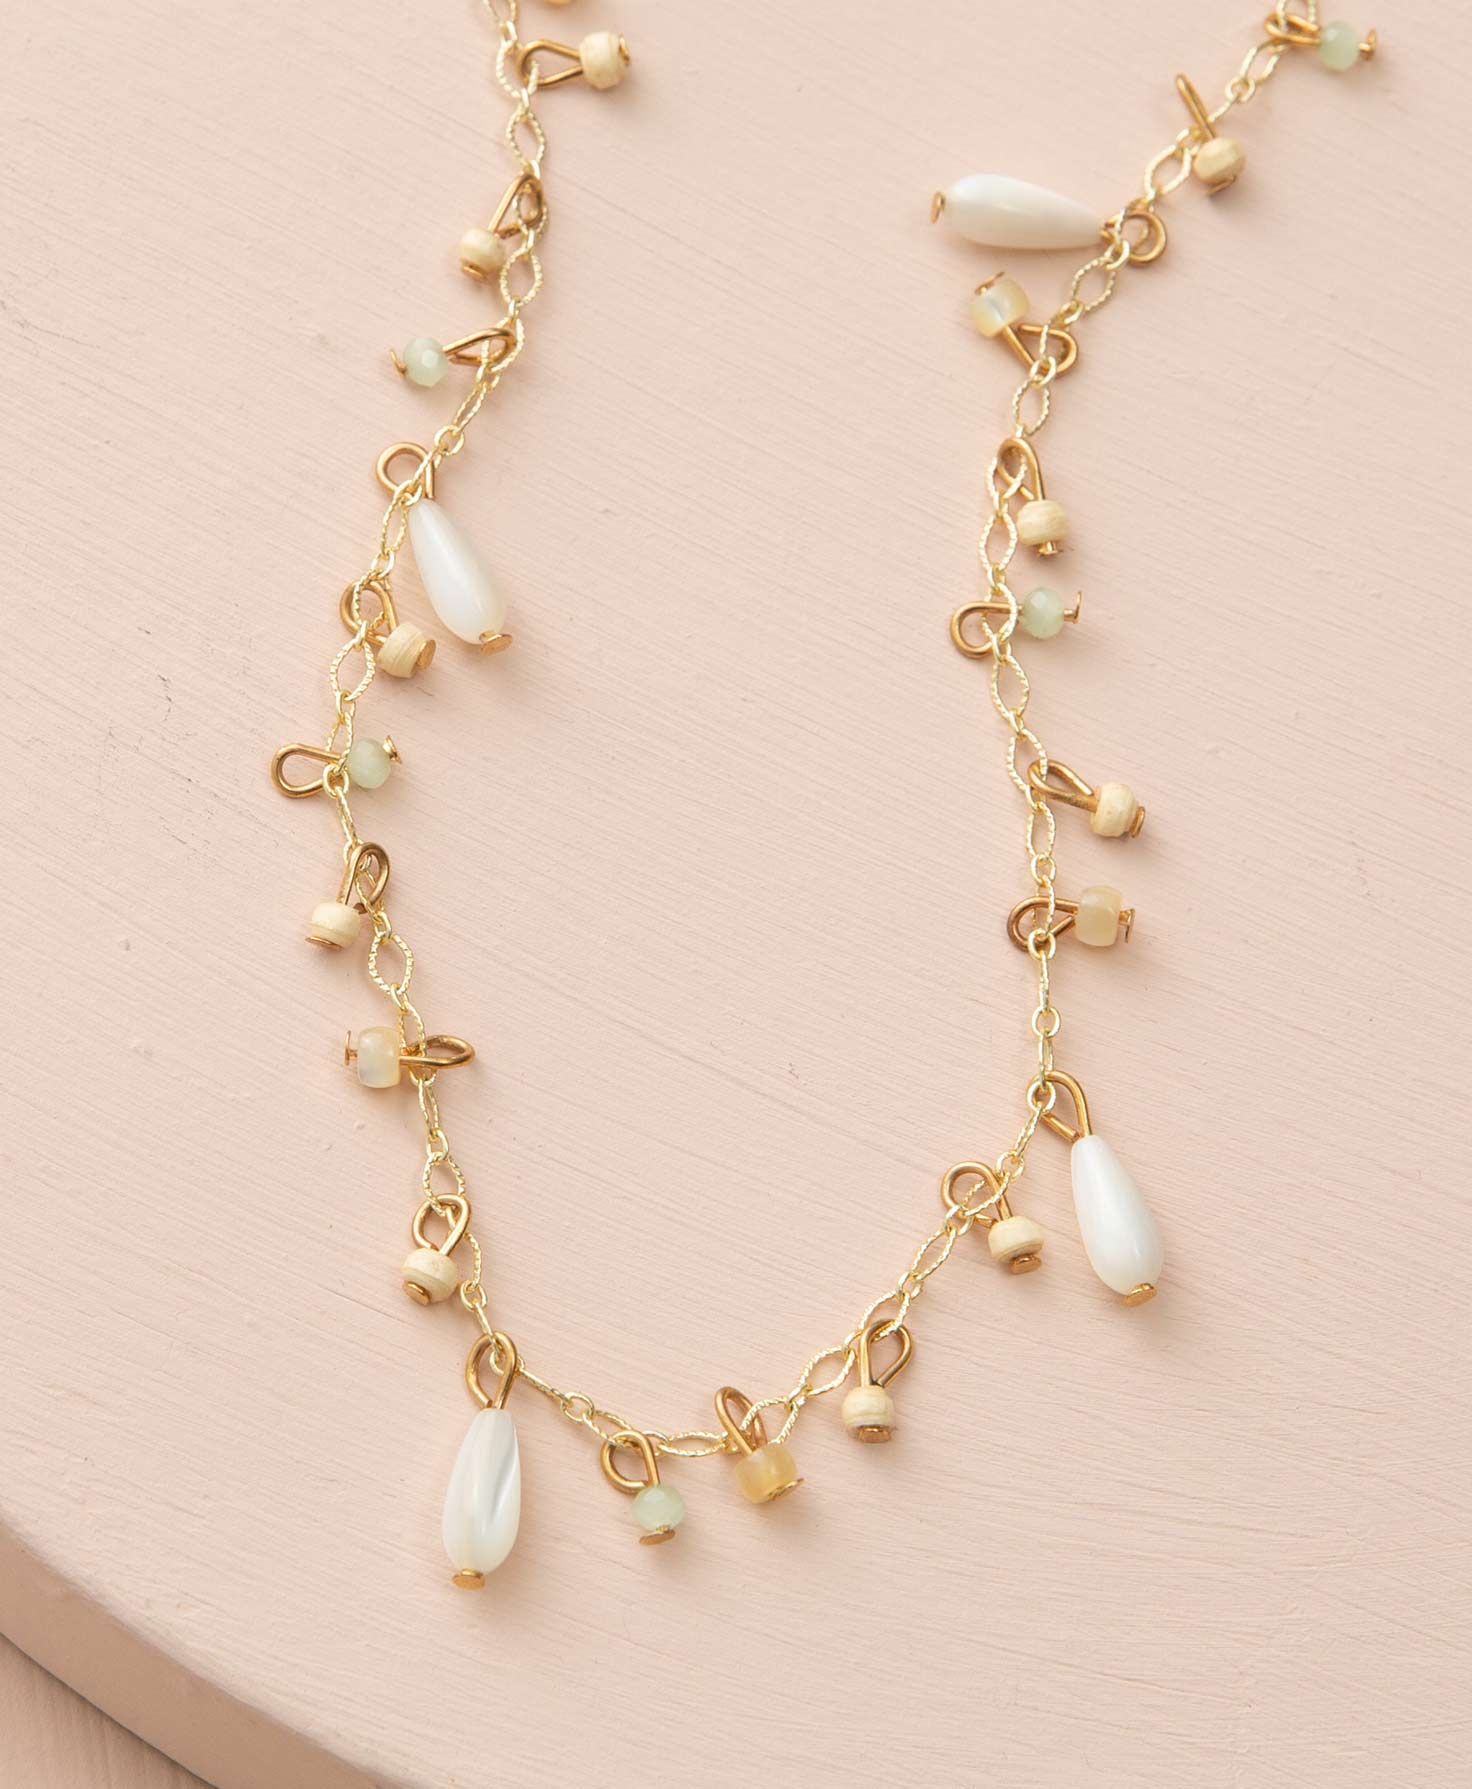 Shipshape Necklace | Noonday Collection